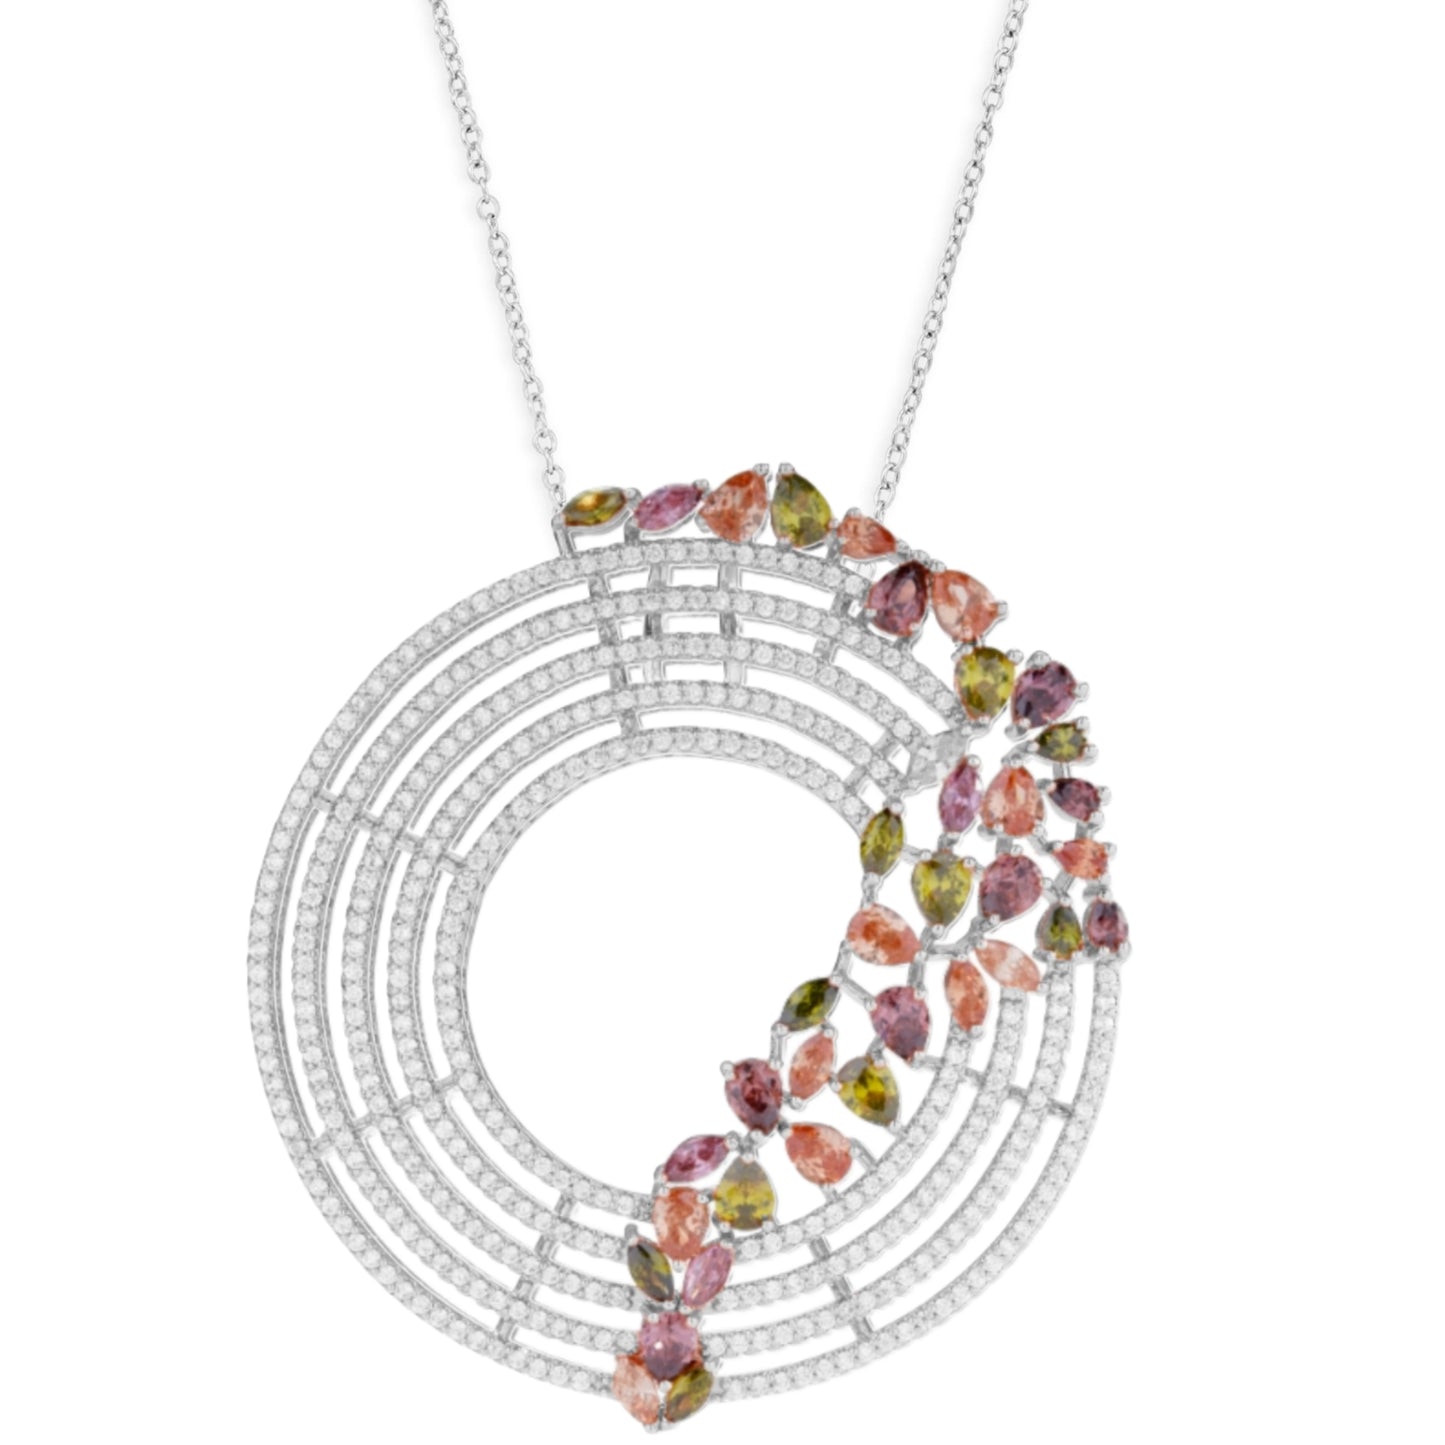 Rose Gold or Rhodium Plated Sterling Silver Colorful Sprinkled CZ Necklace